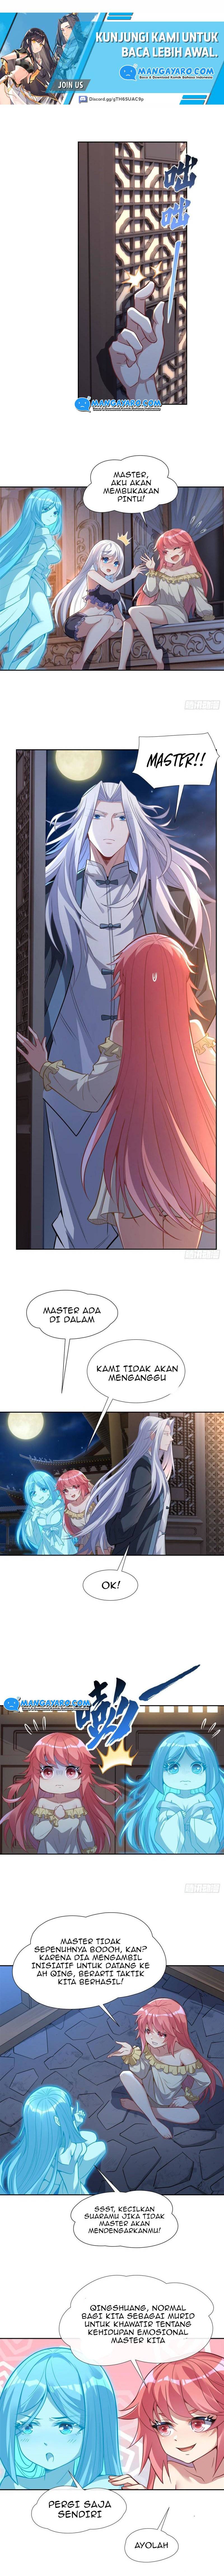 Dilarang COPAS - situs resmi www.mangacanblog.com - Komik my female apprentices are all big shots from the future 074 - chapter 74 75 Indonesia my female apprentices are all big shots from the future 074 - chapter 74 Terbaru 5|Baca Manga Komik Indonesia|Mangacan